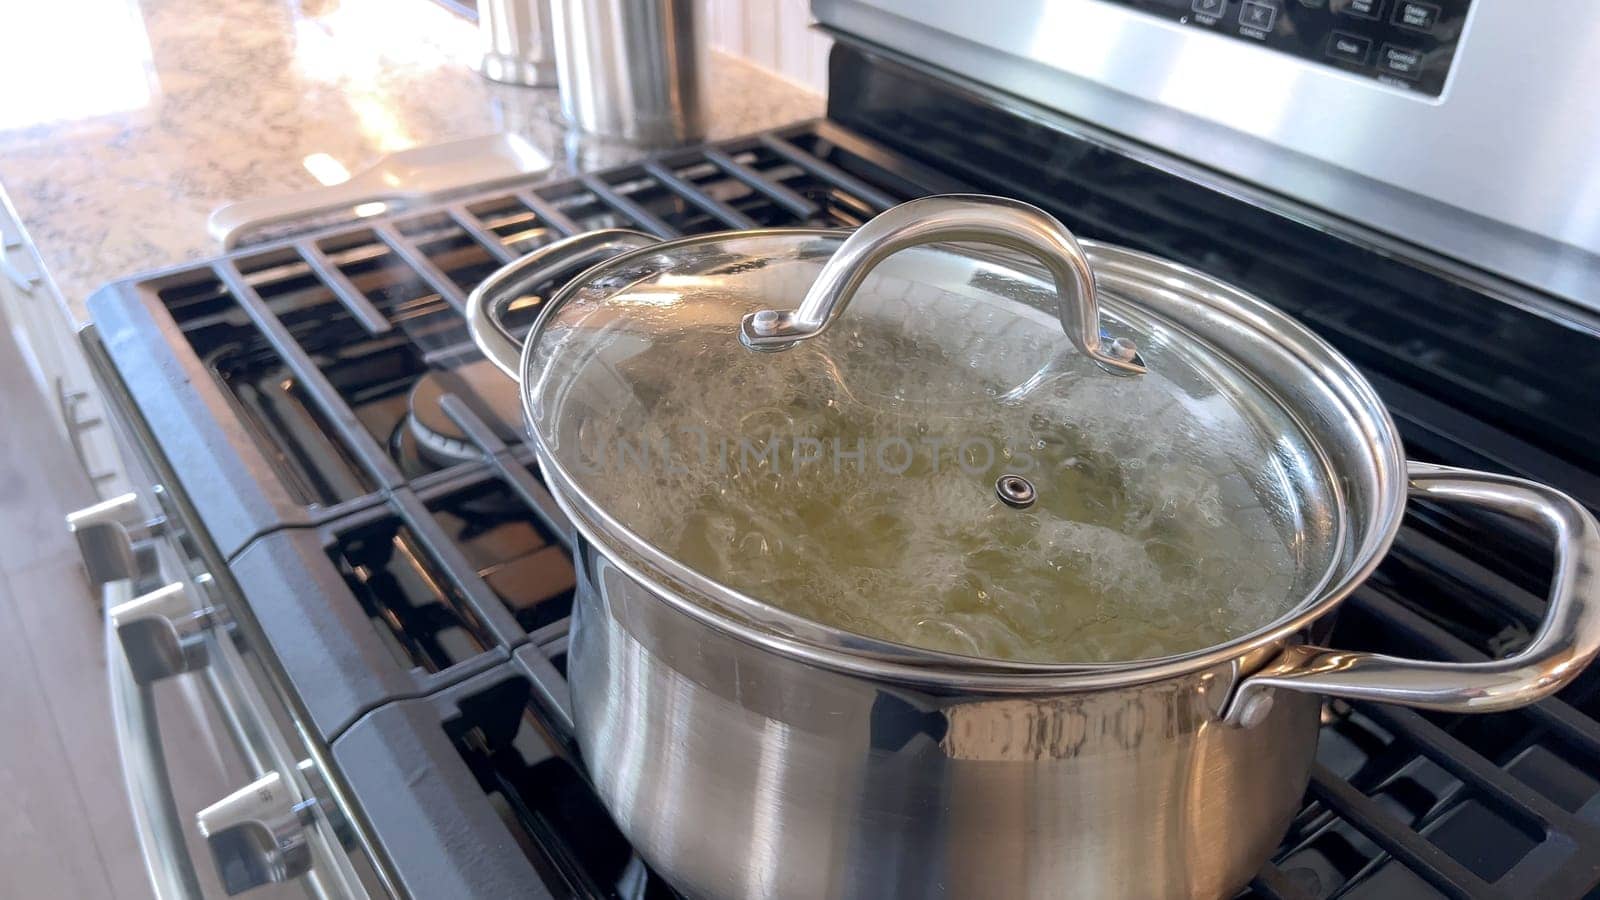 Captured in a home kitchen, this image features a stainless steel pot with boiling water on a gas stove, showcasing a common culinary preparation step with steam rising from the pot under natural light.